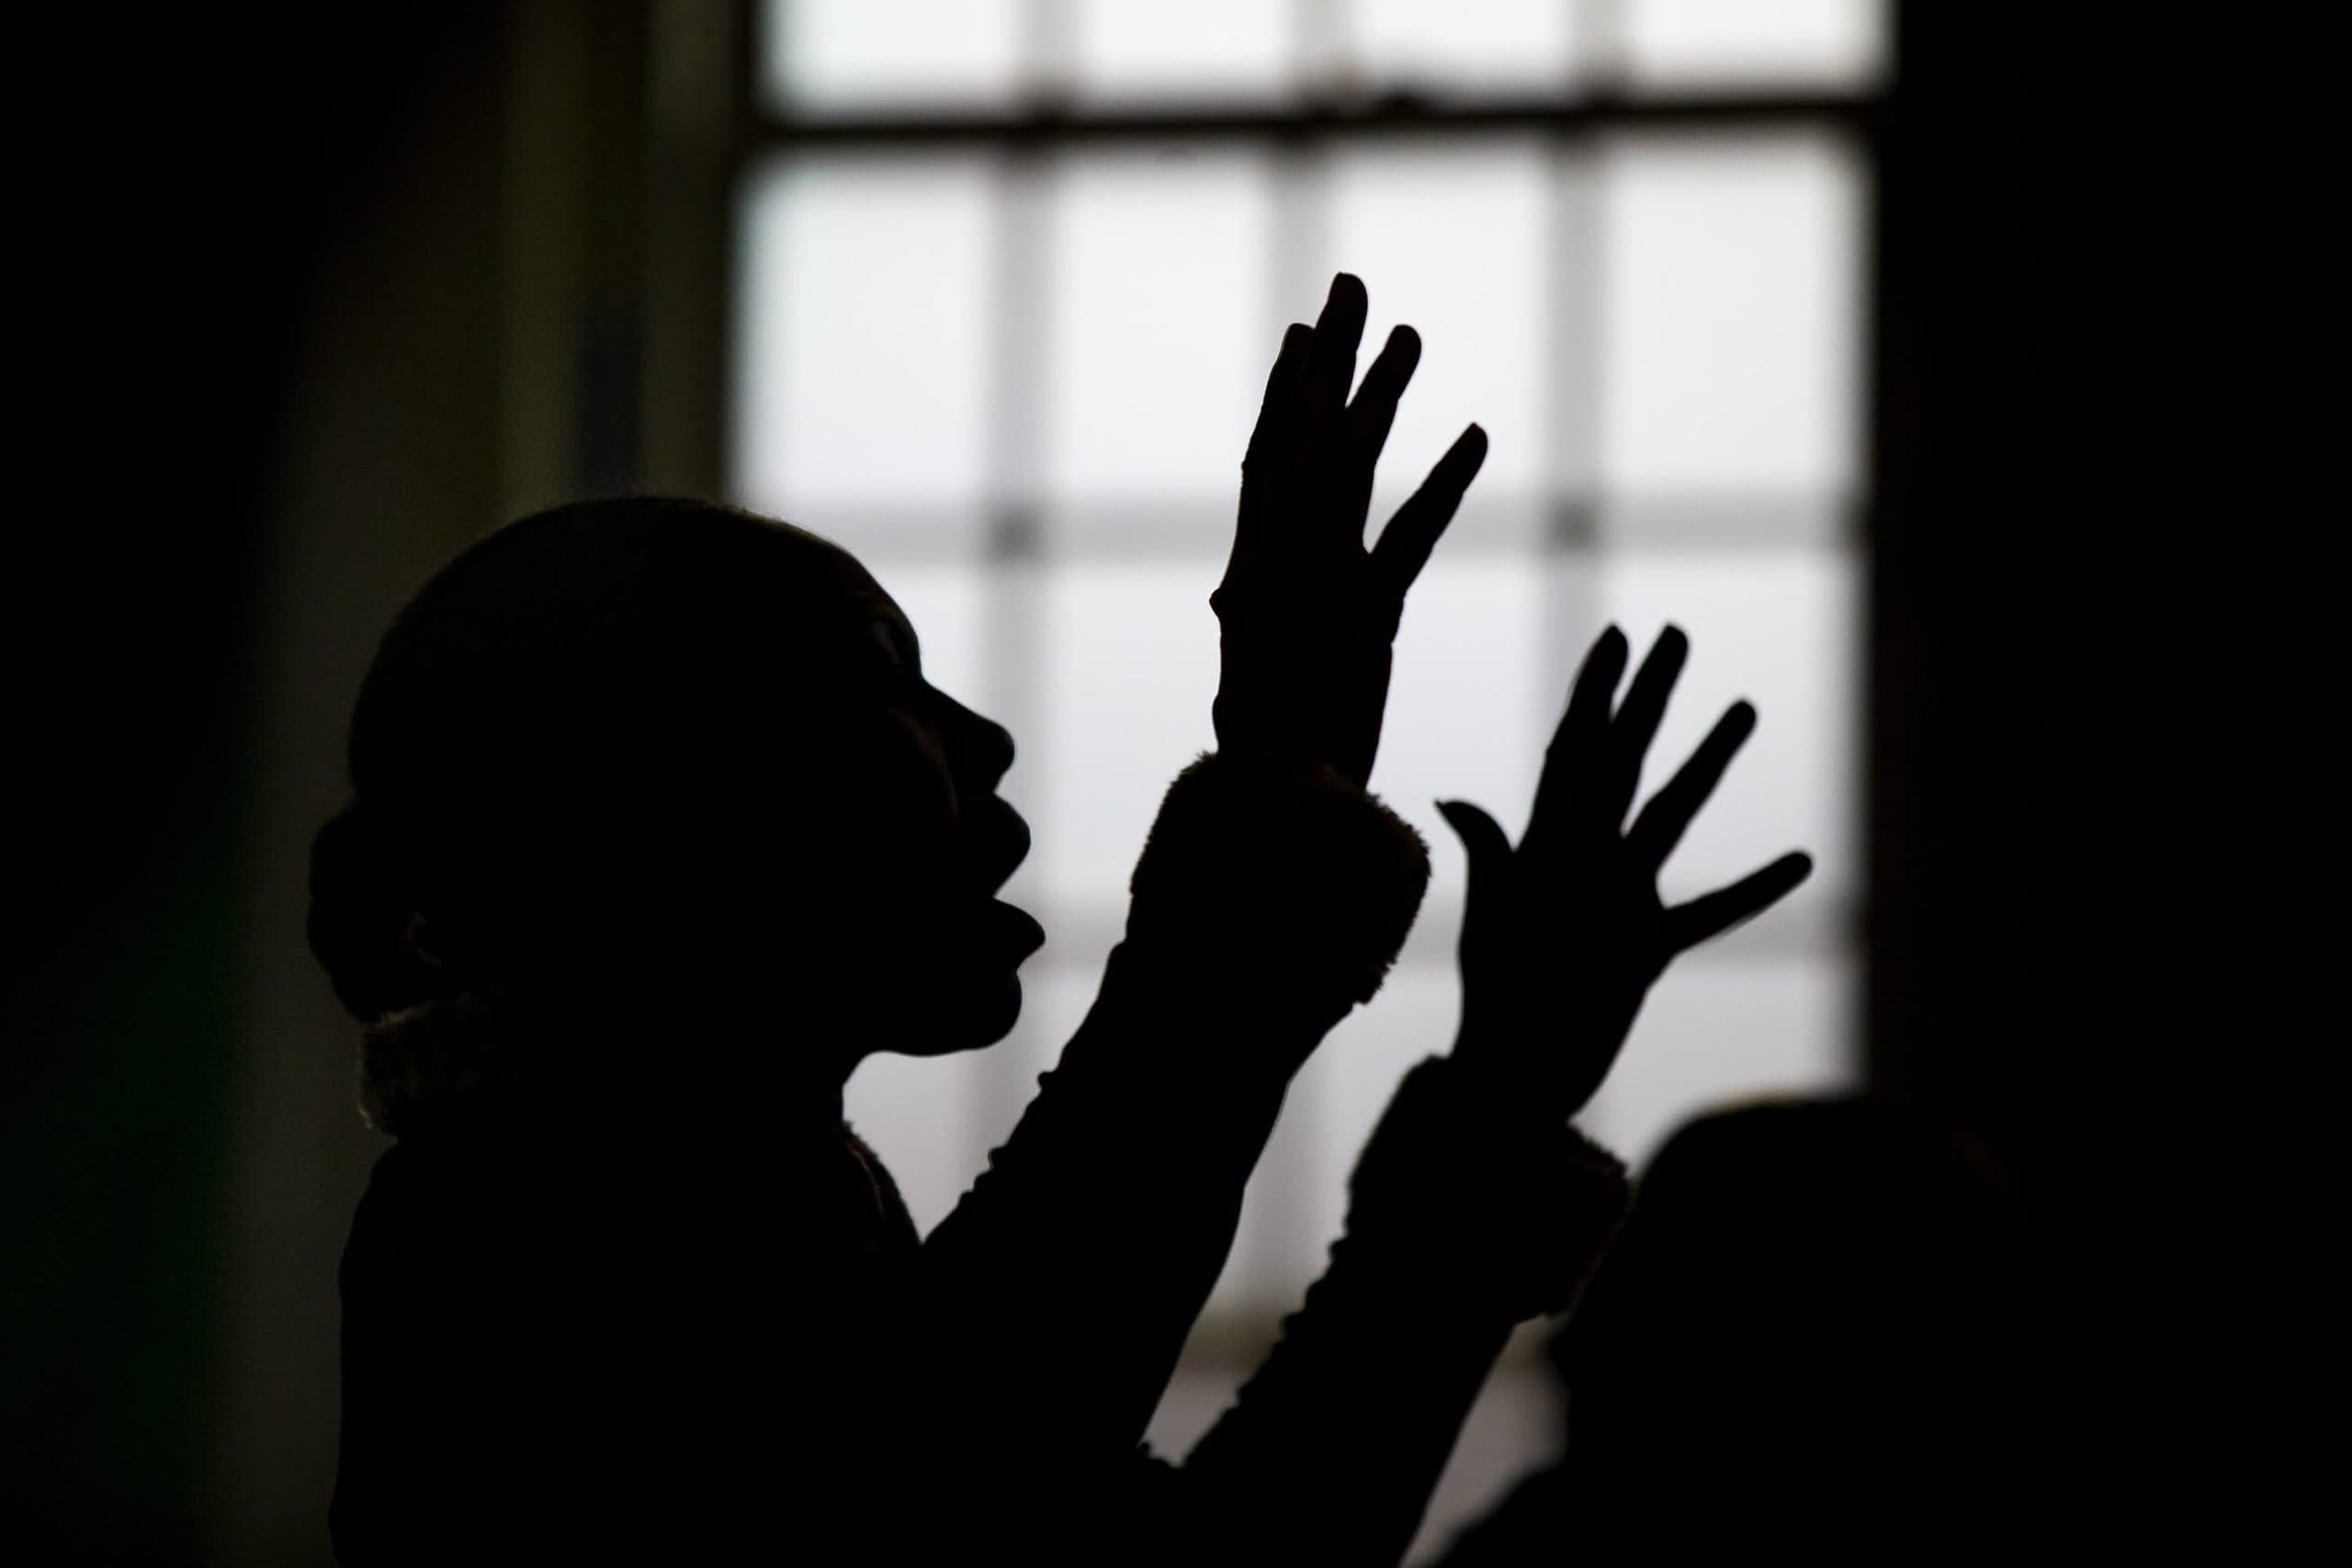 A parishioner at the Universal Missionary Church sings during a recent service. (Jesse Costa/WBUR)